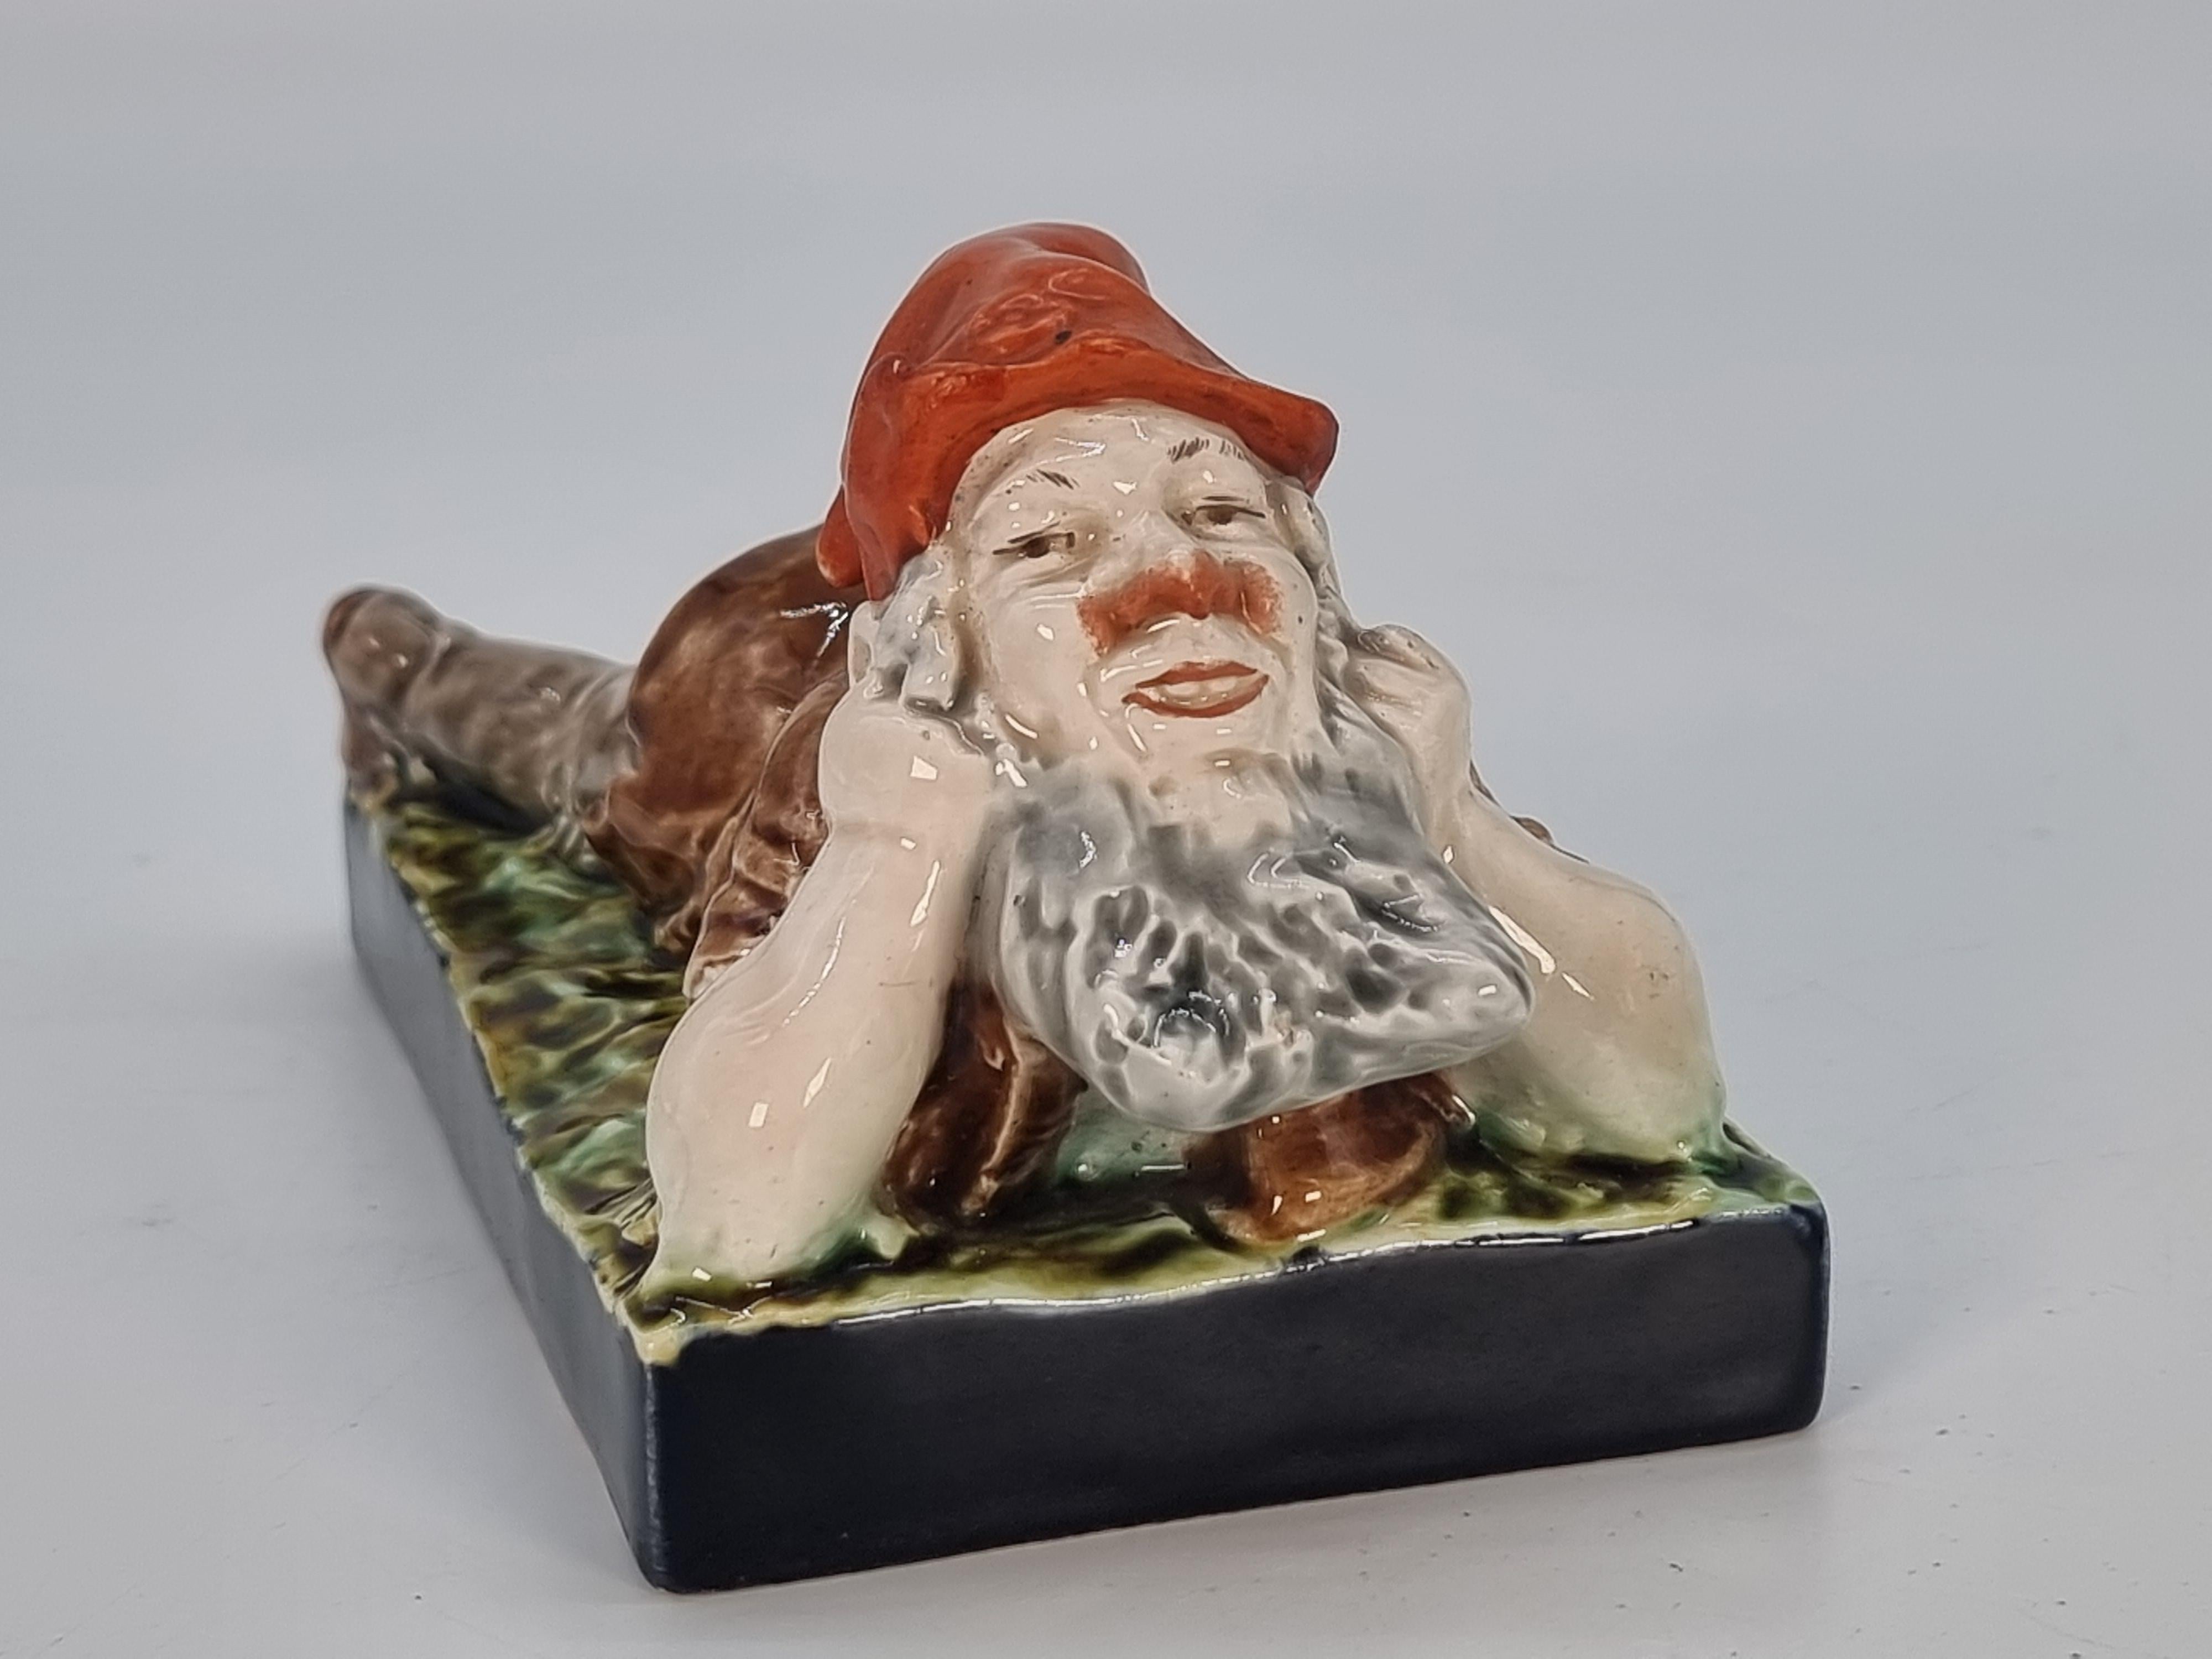 
This most unusual and very pleasing majolica pottery figure was made in Germany or Austria circa 1880 and it depicts a happy rosy cheeked gnome lying down on his front with his head raised supported by his hands from bent elbows. He has a happy